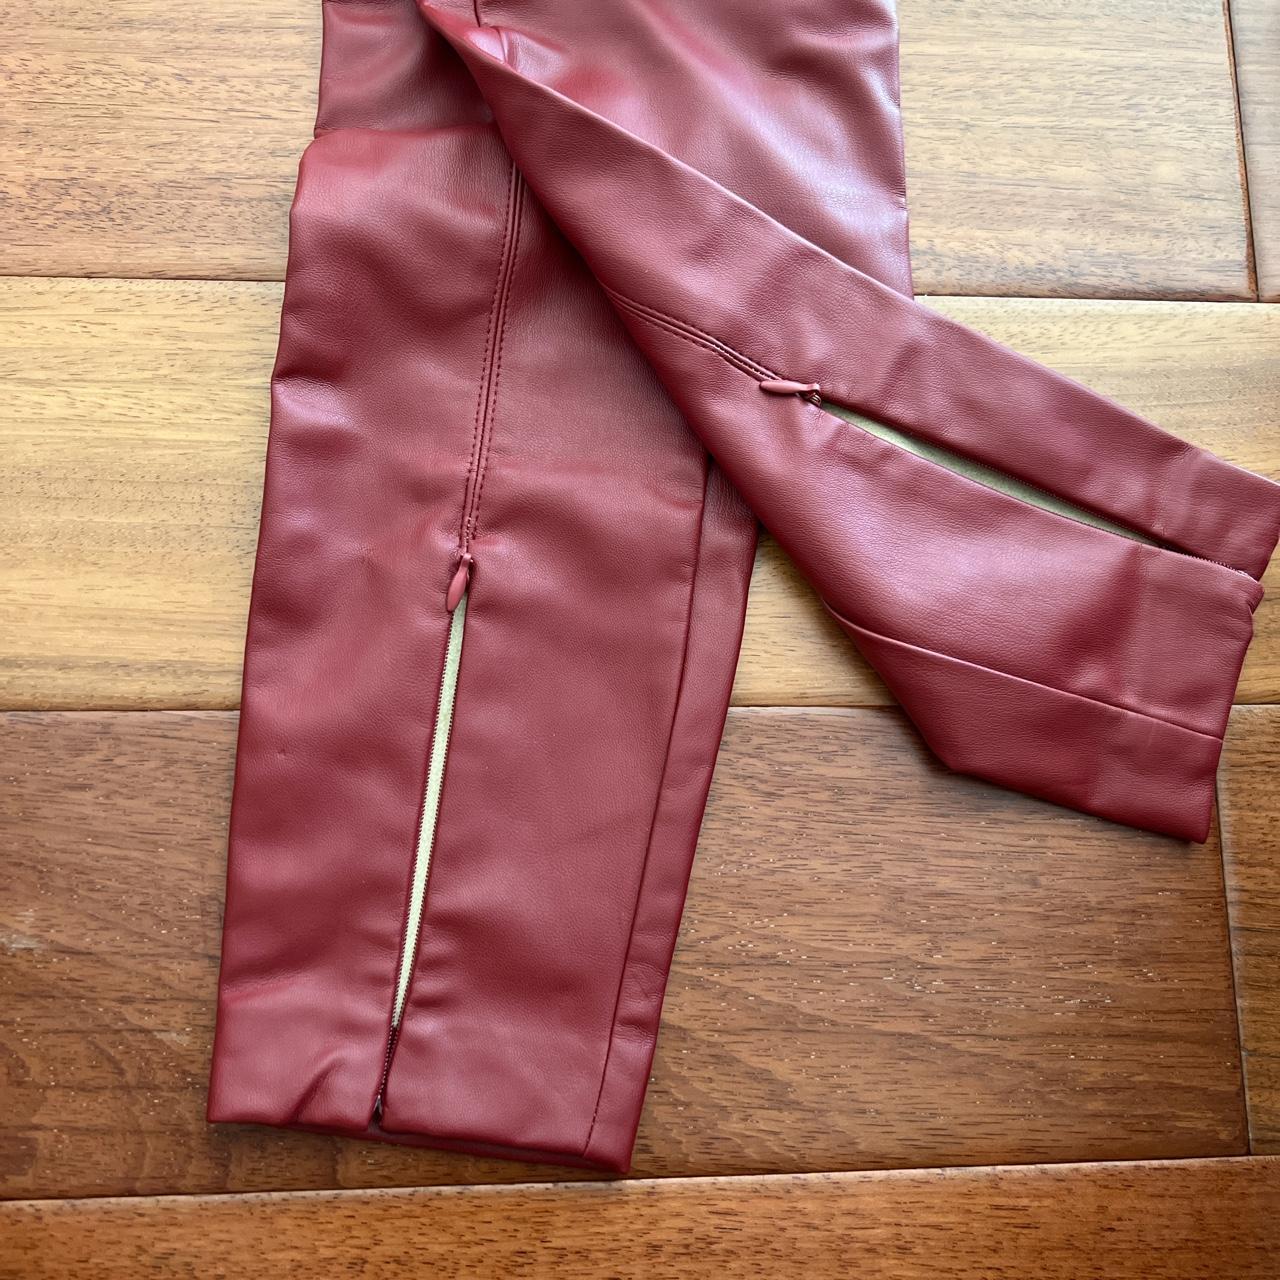 Burgundy leather trousers from Zara | Vinted